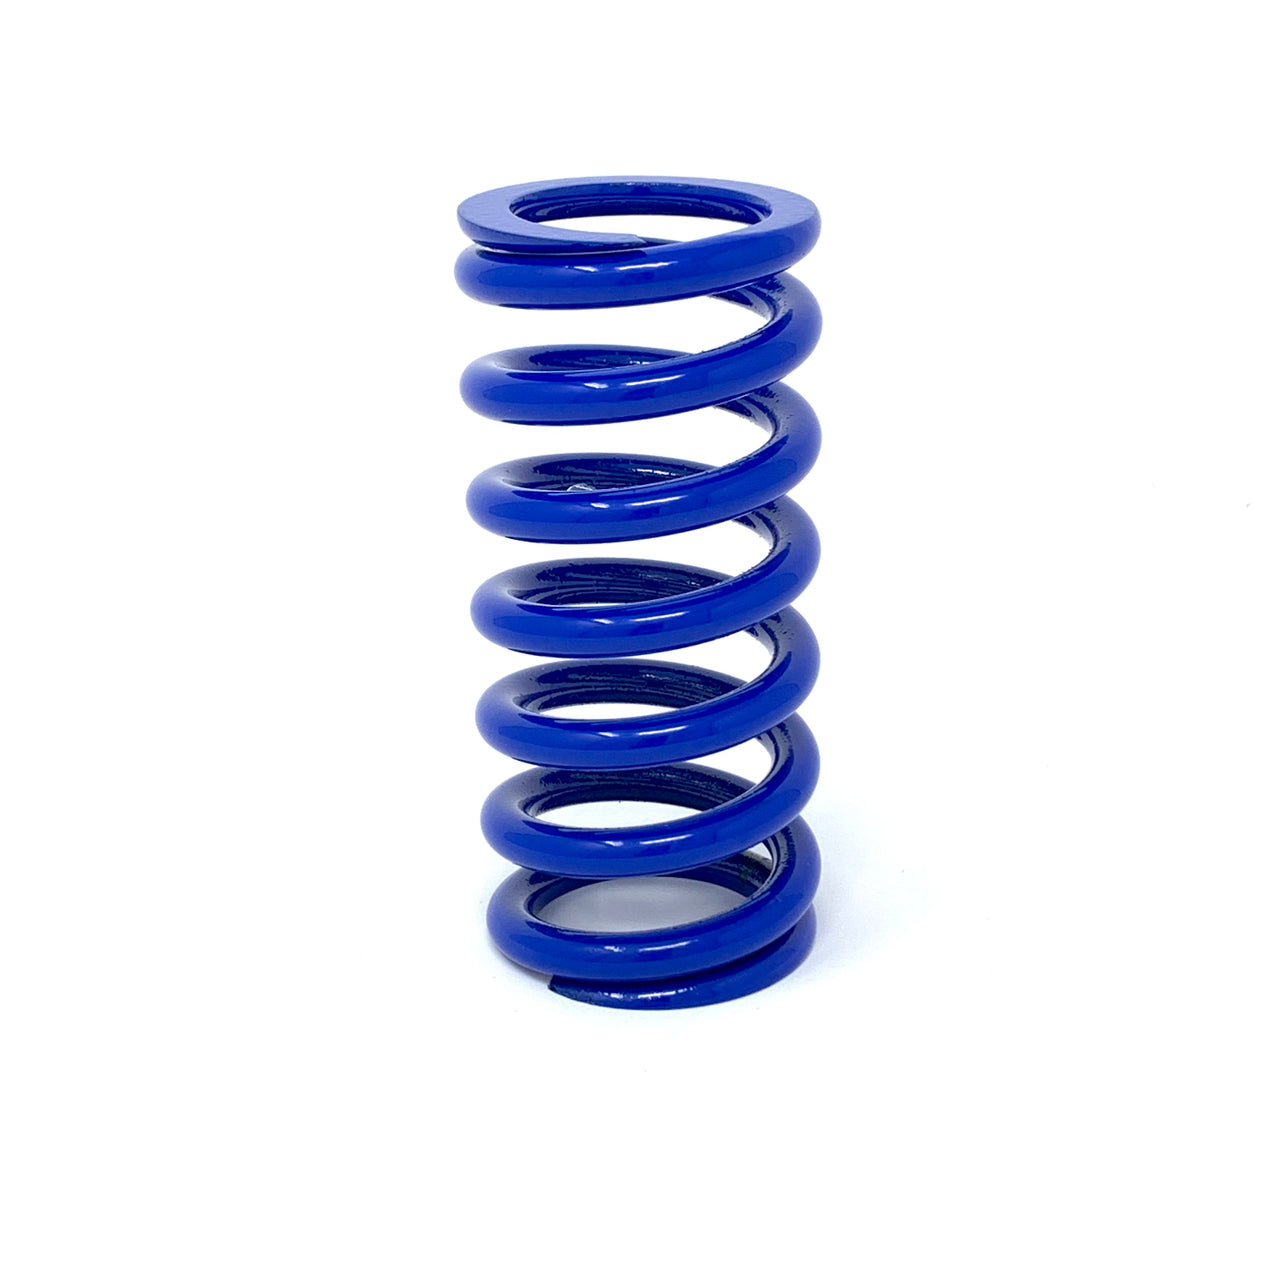 T3Minis Heavy Duty Rear Shock Spring for CRF50